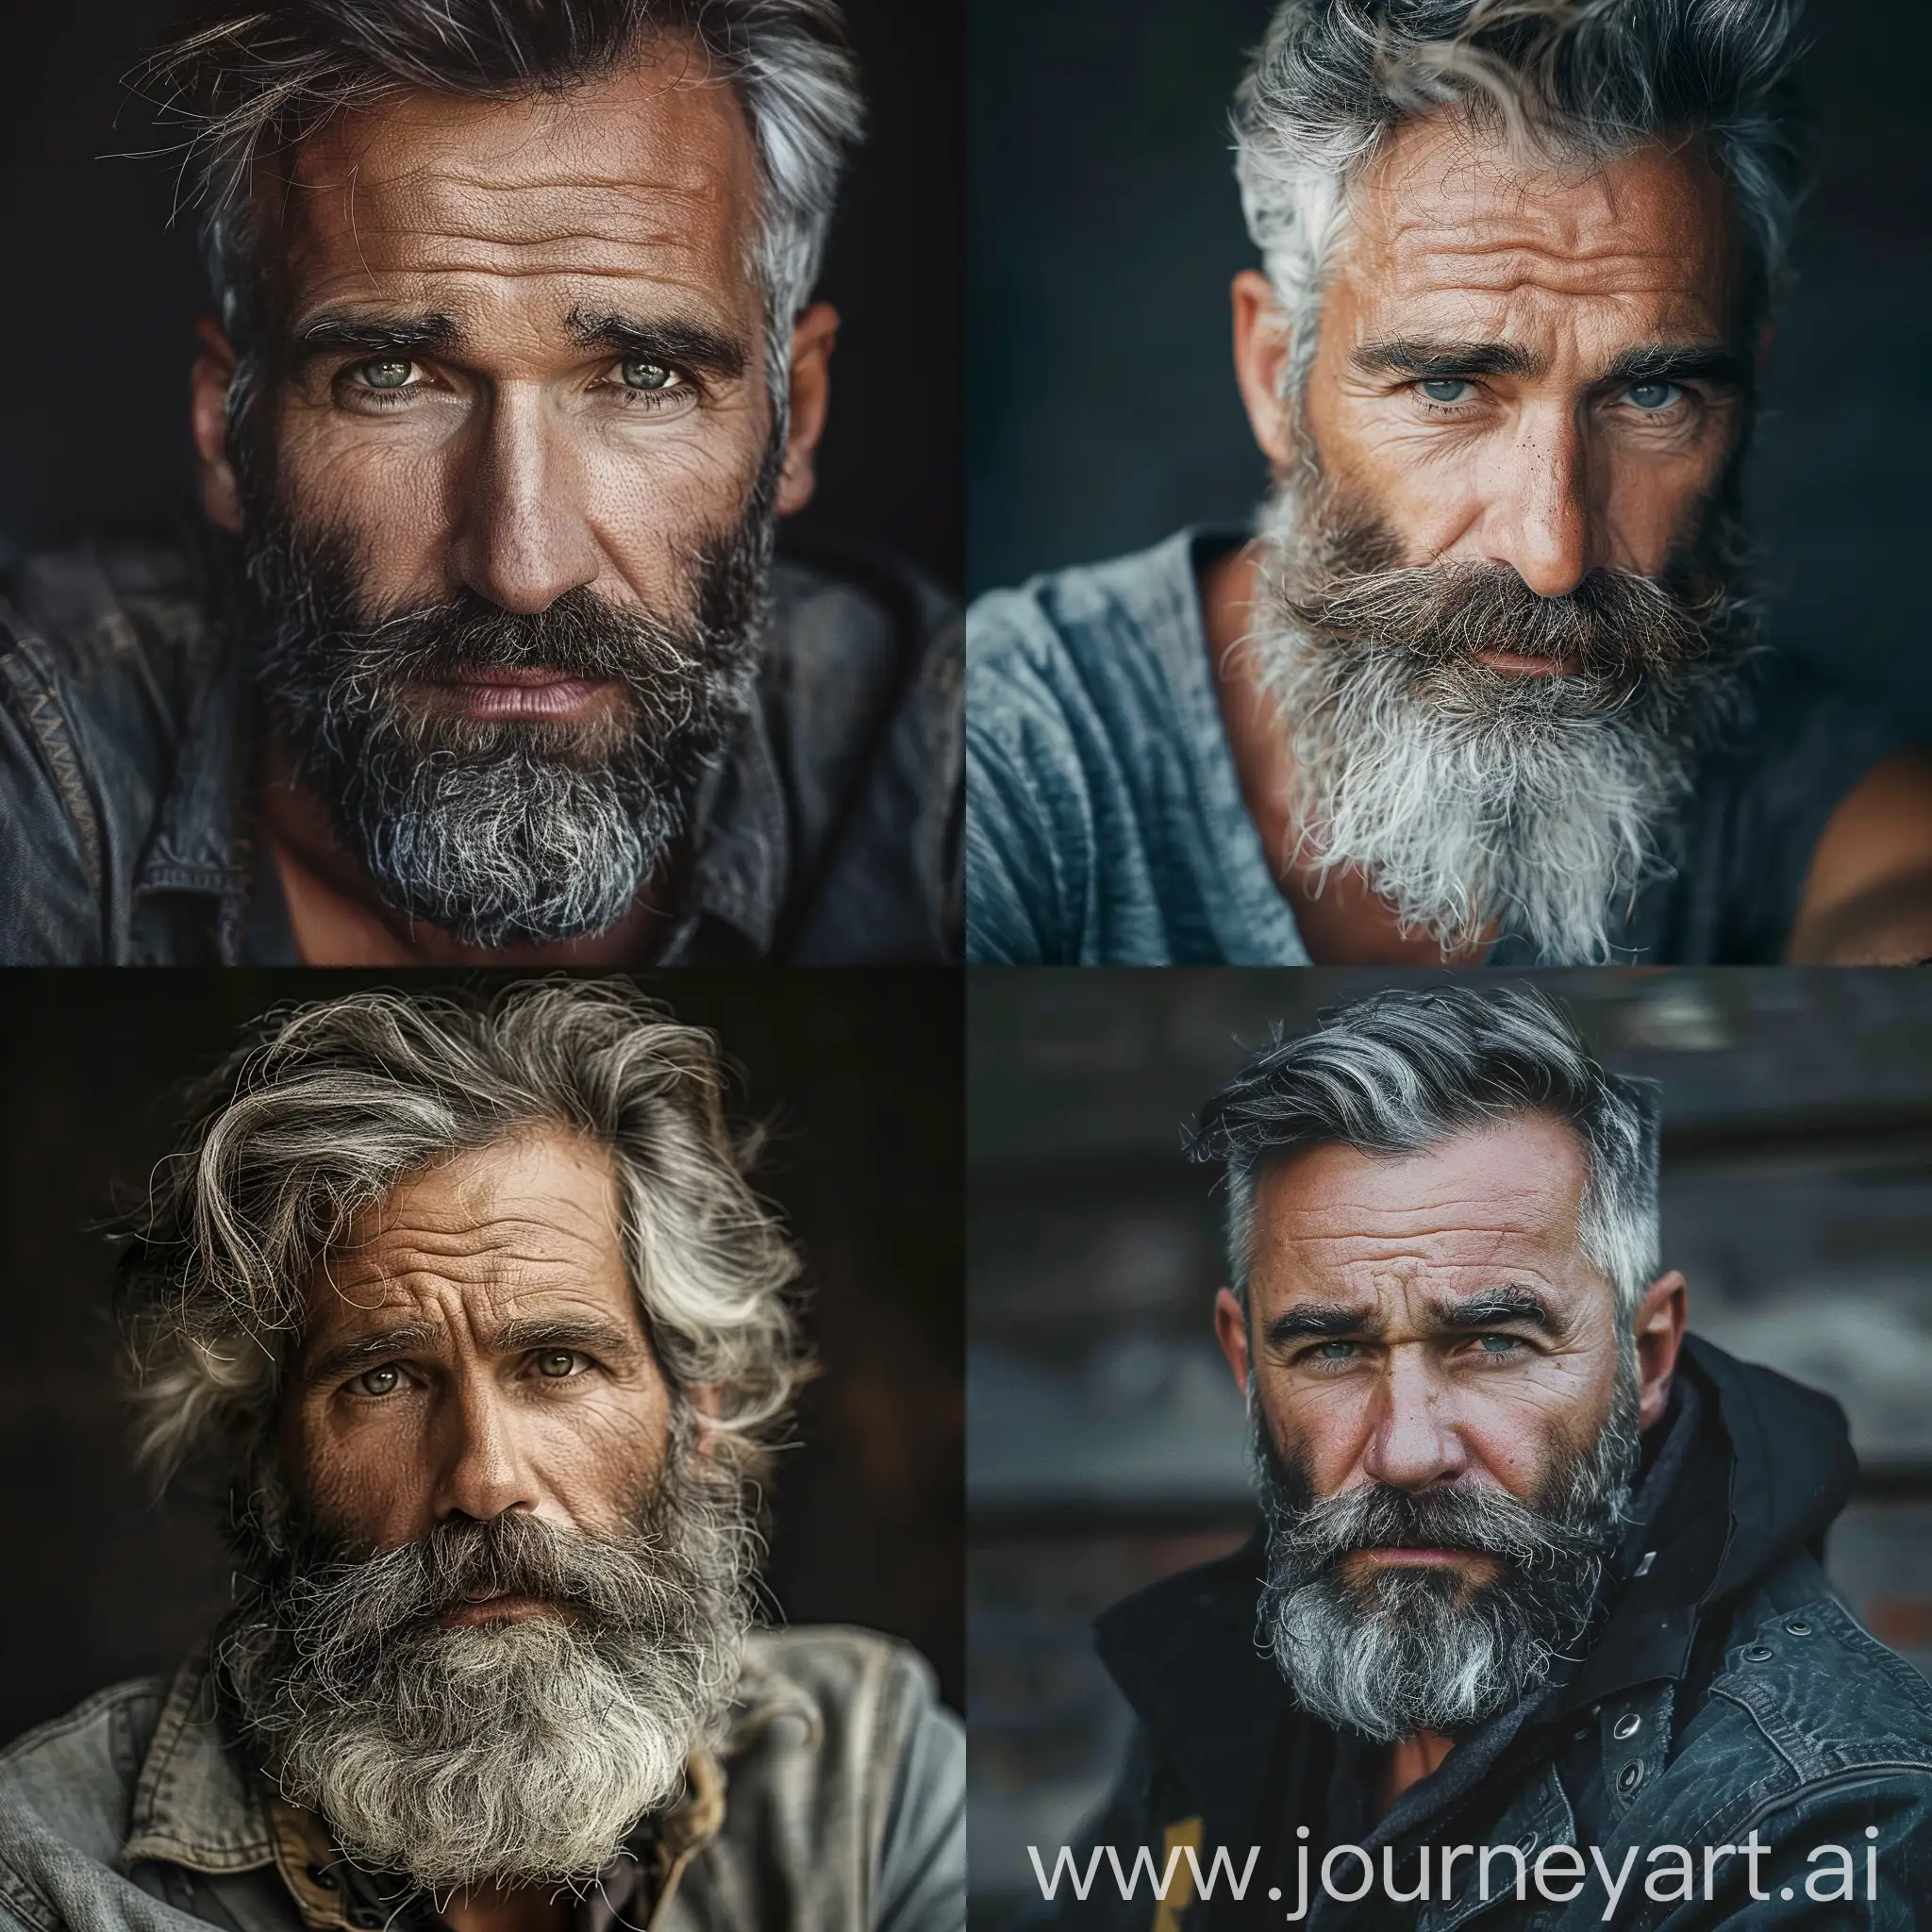 Mature-Man-with-Beard-Age-40-Portrait-in-Profile-View